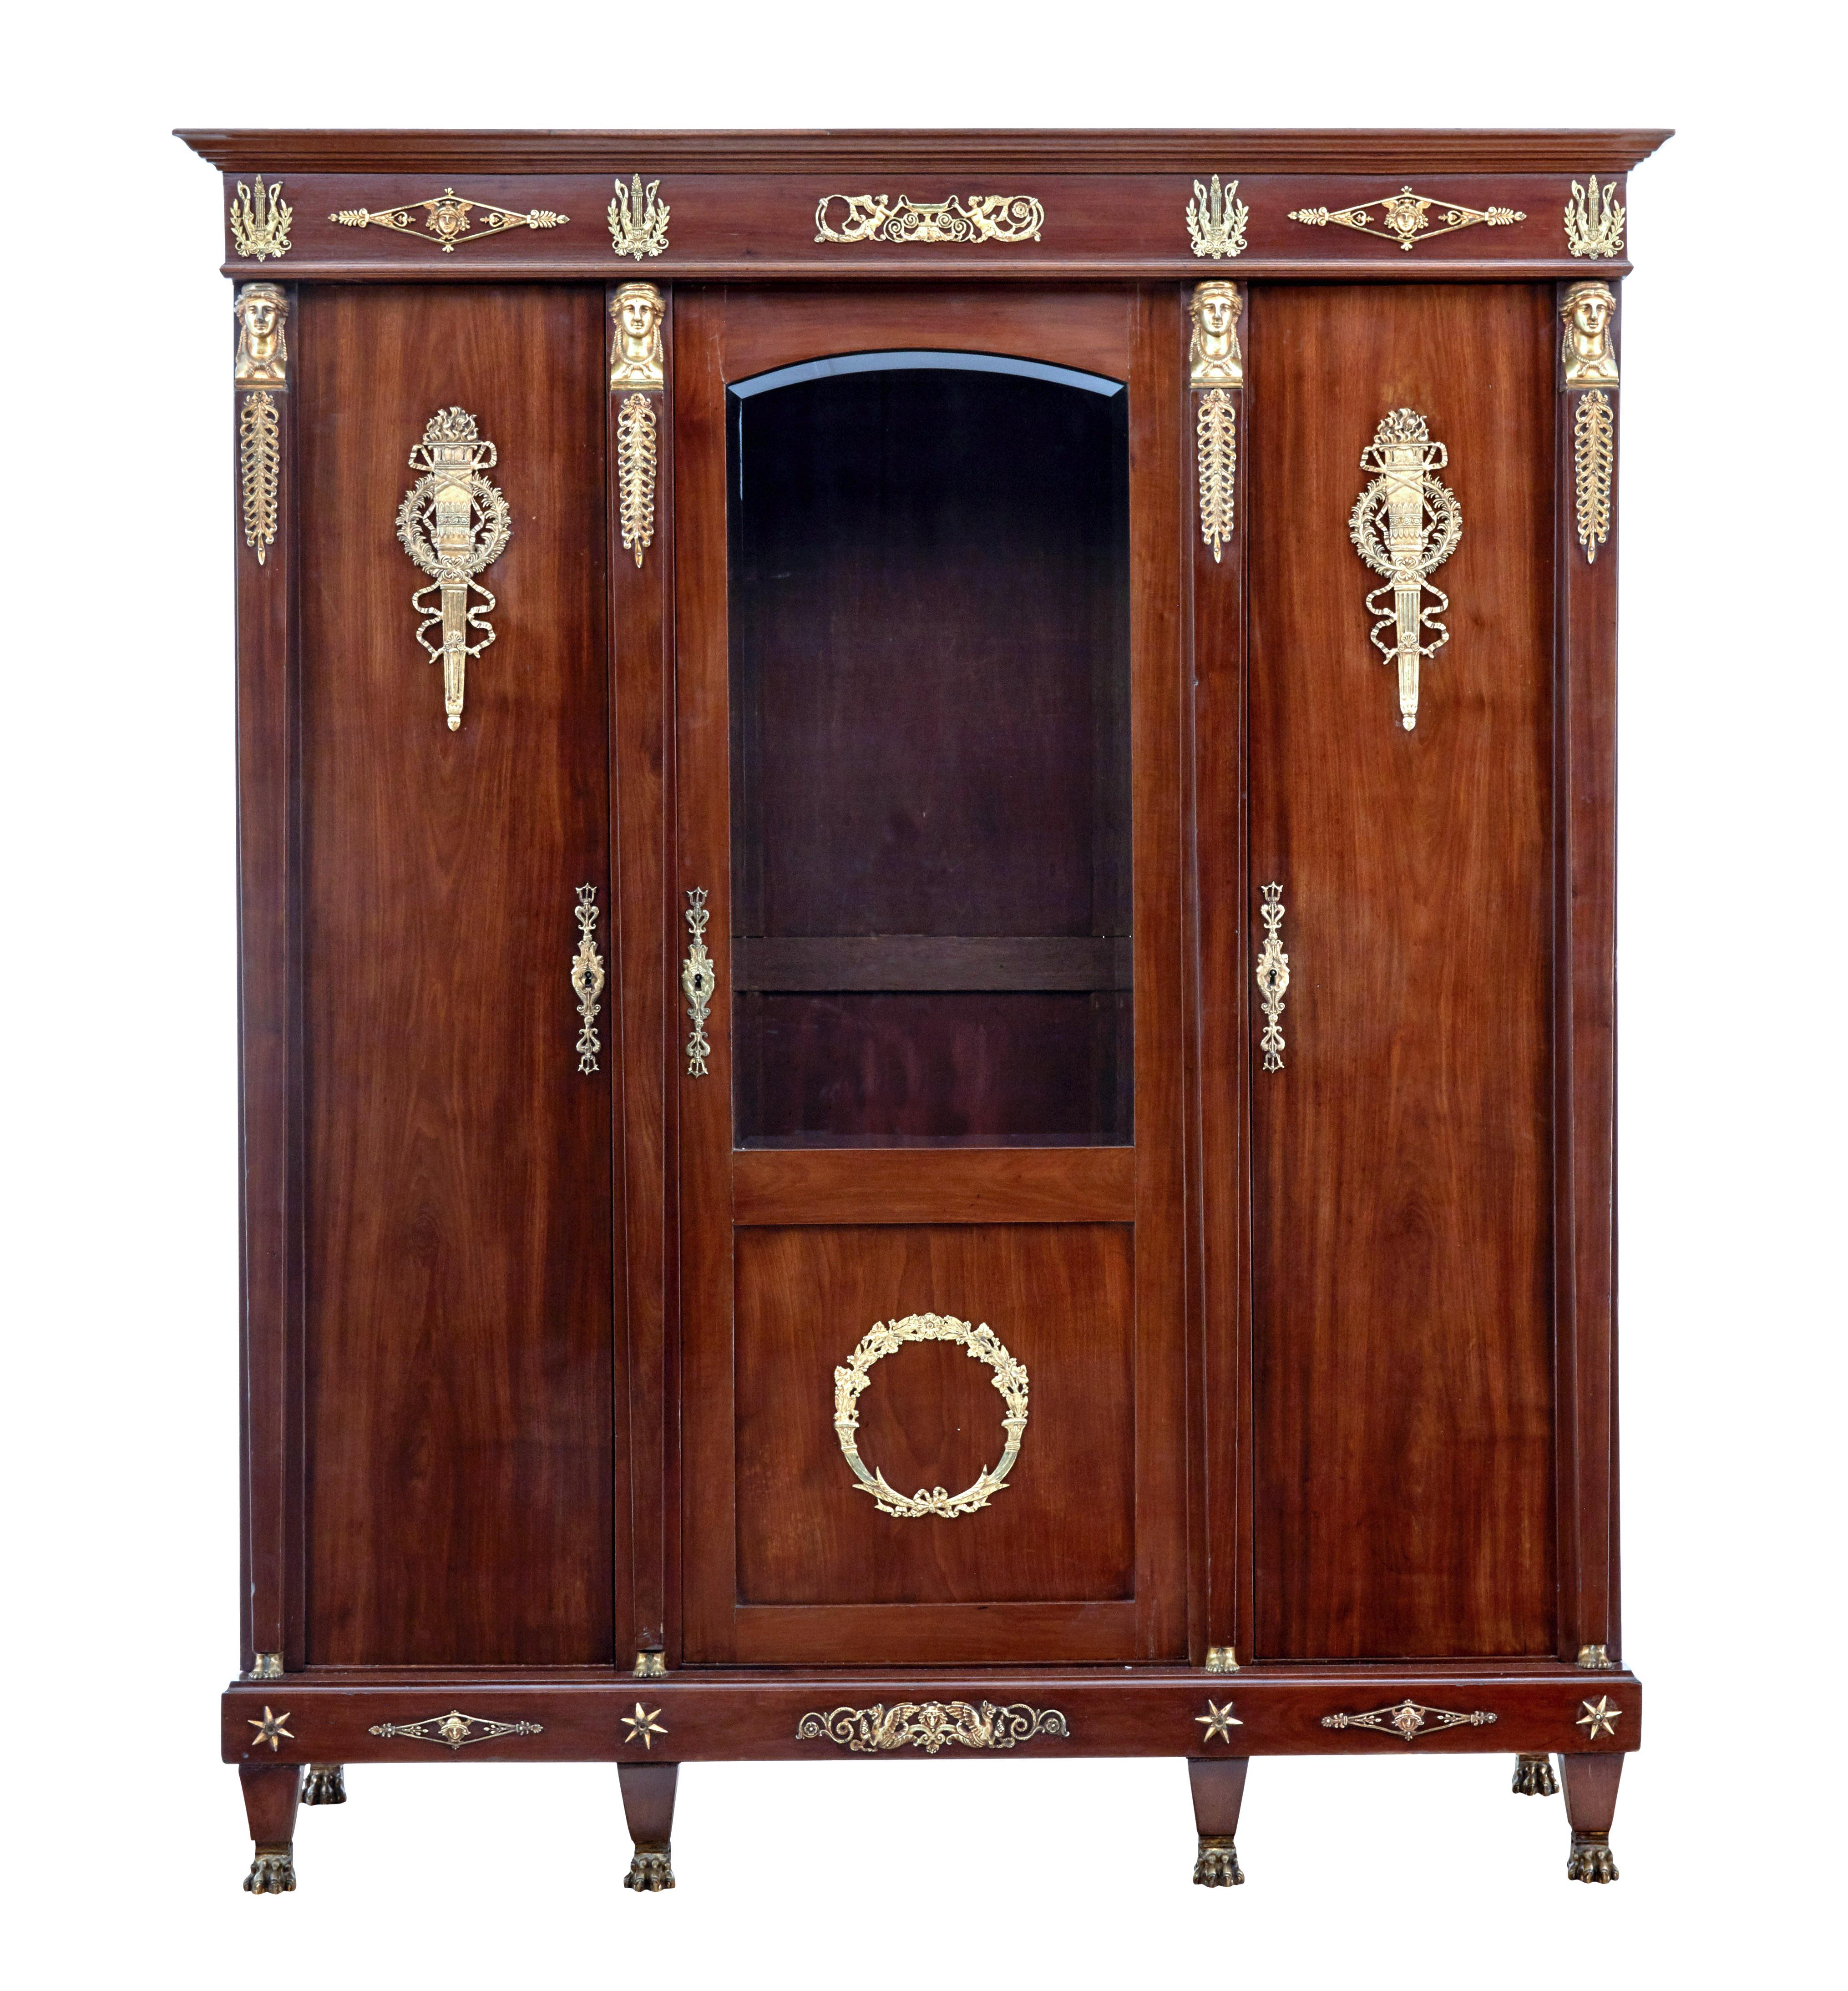 Late 19th century French mahogany and ormolu armoire, circa 1890.

Fine quality French empire revival mahogany cabinet, circa 1890.

Generous proportions and as with all furniture of this scale and period it was built to come apart.

Central